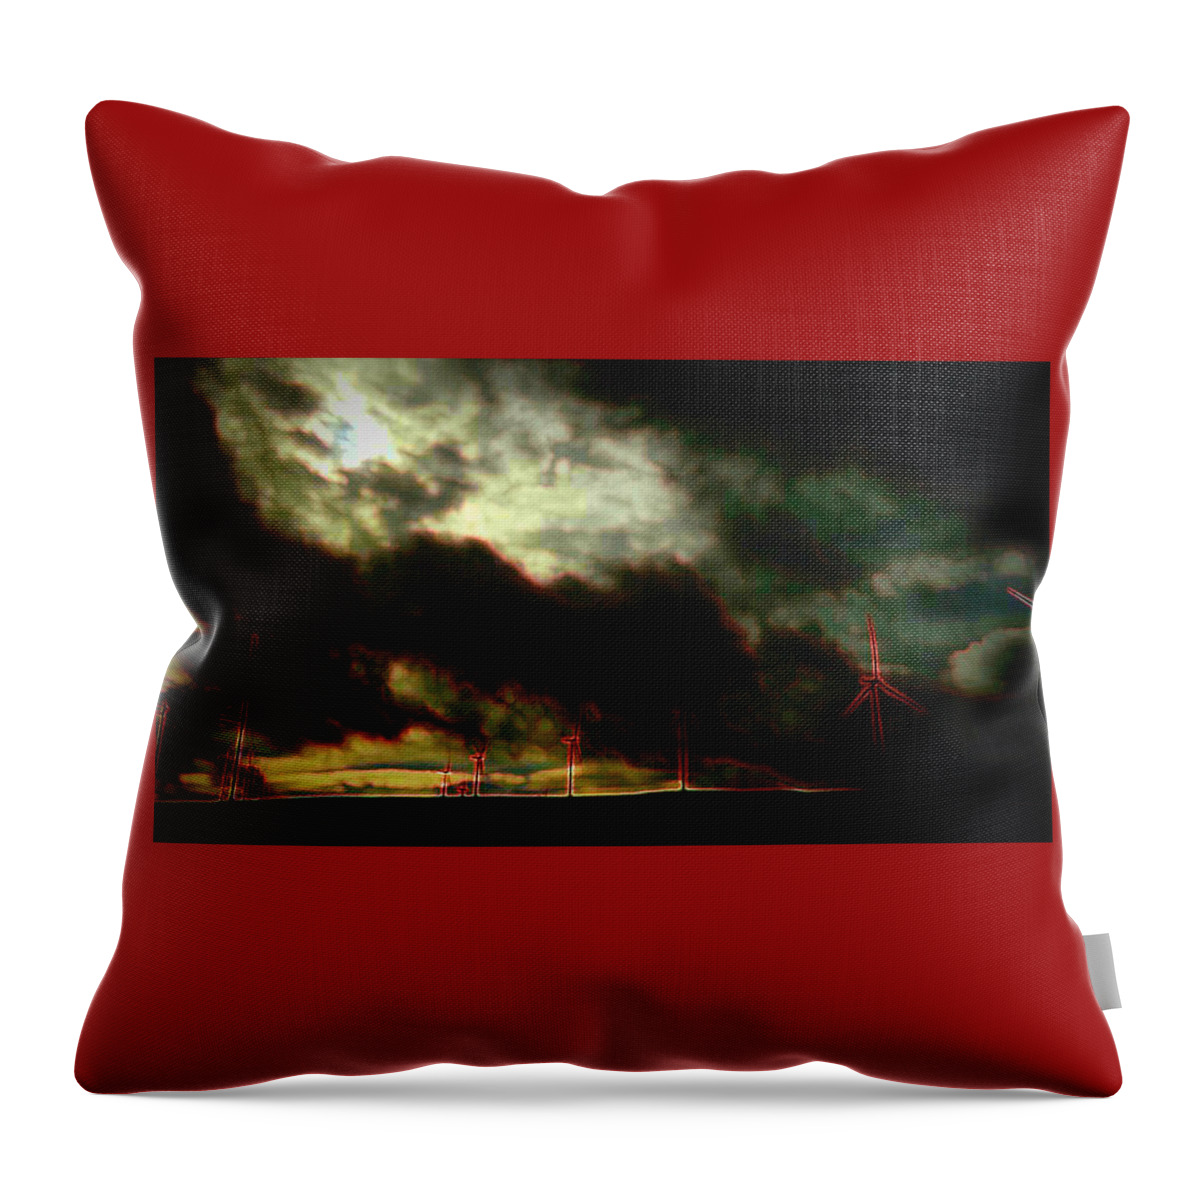 Apocalypse Throw Pillow featuring the photograph Apocalypse by Angeline Mcgraw